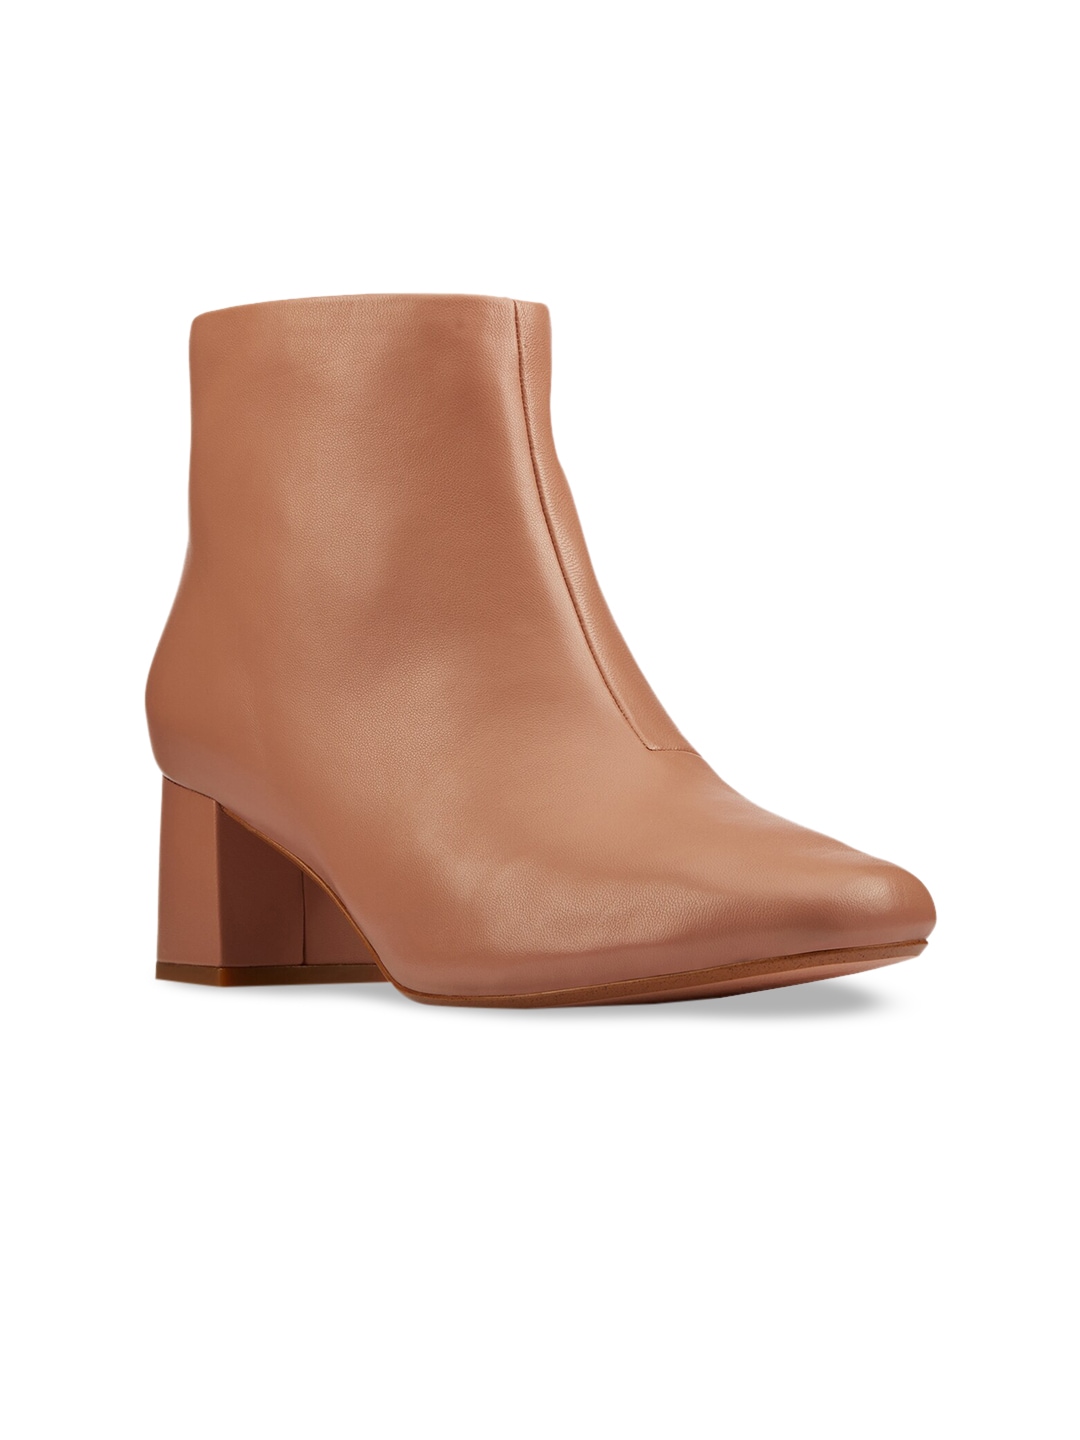 Clarks Brown Leather Block Heeled Boots Price in India